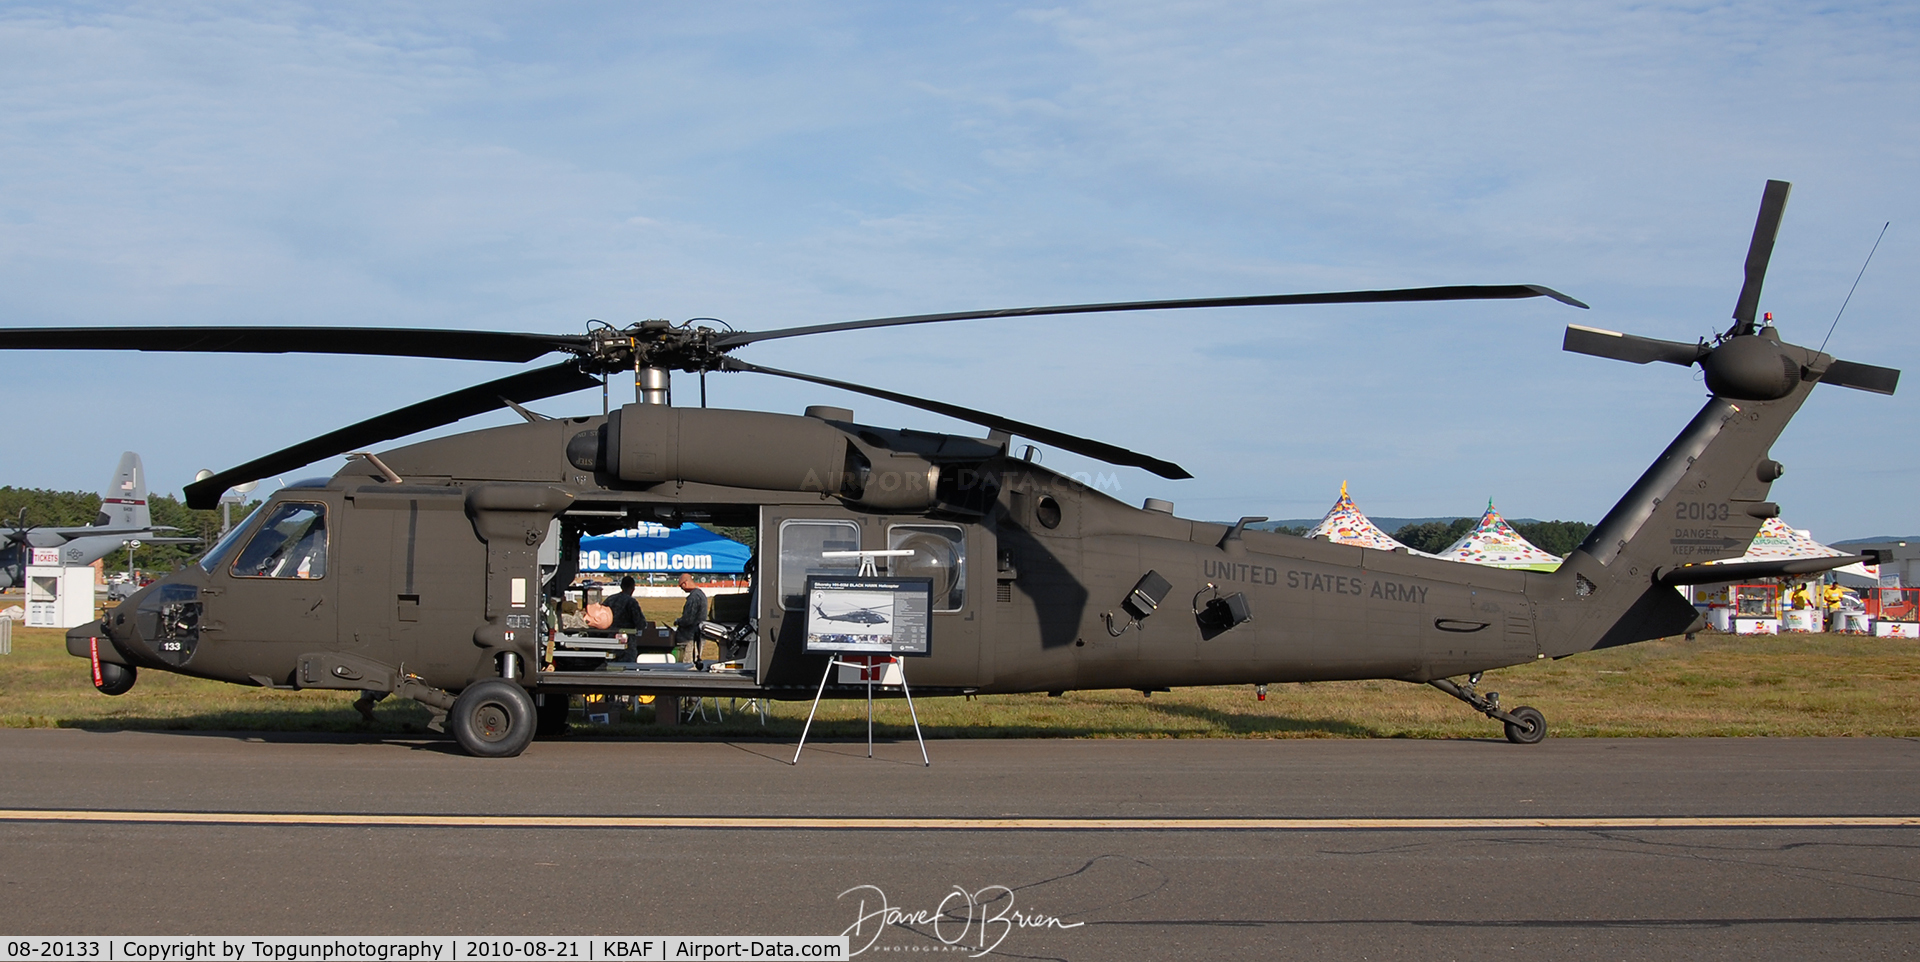 08-20133, 2009 Sikorsky HH-60M Black Hawk C/N Not found 08-20133, MA Army National Guard